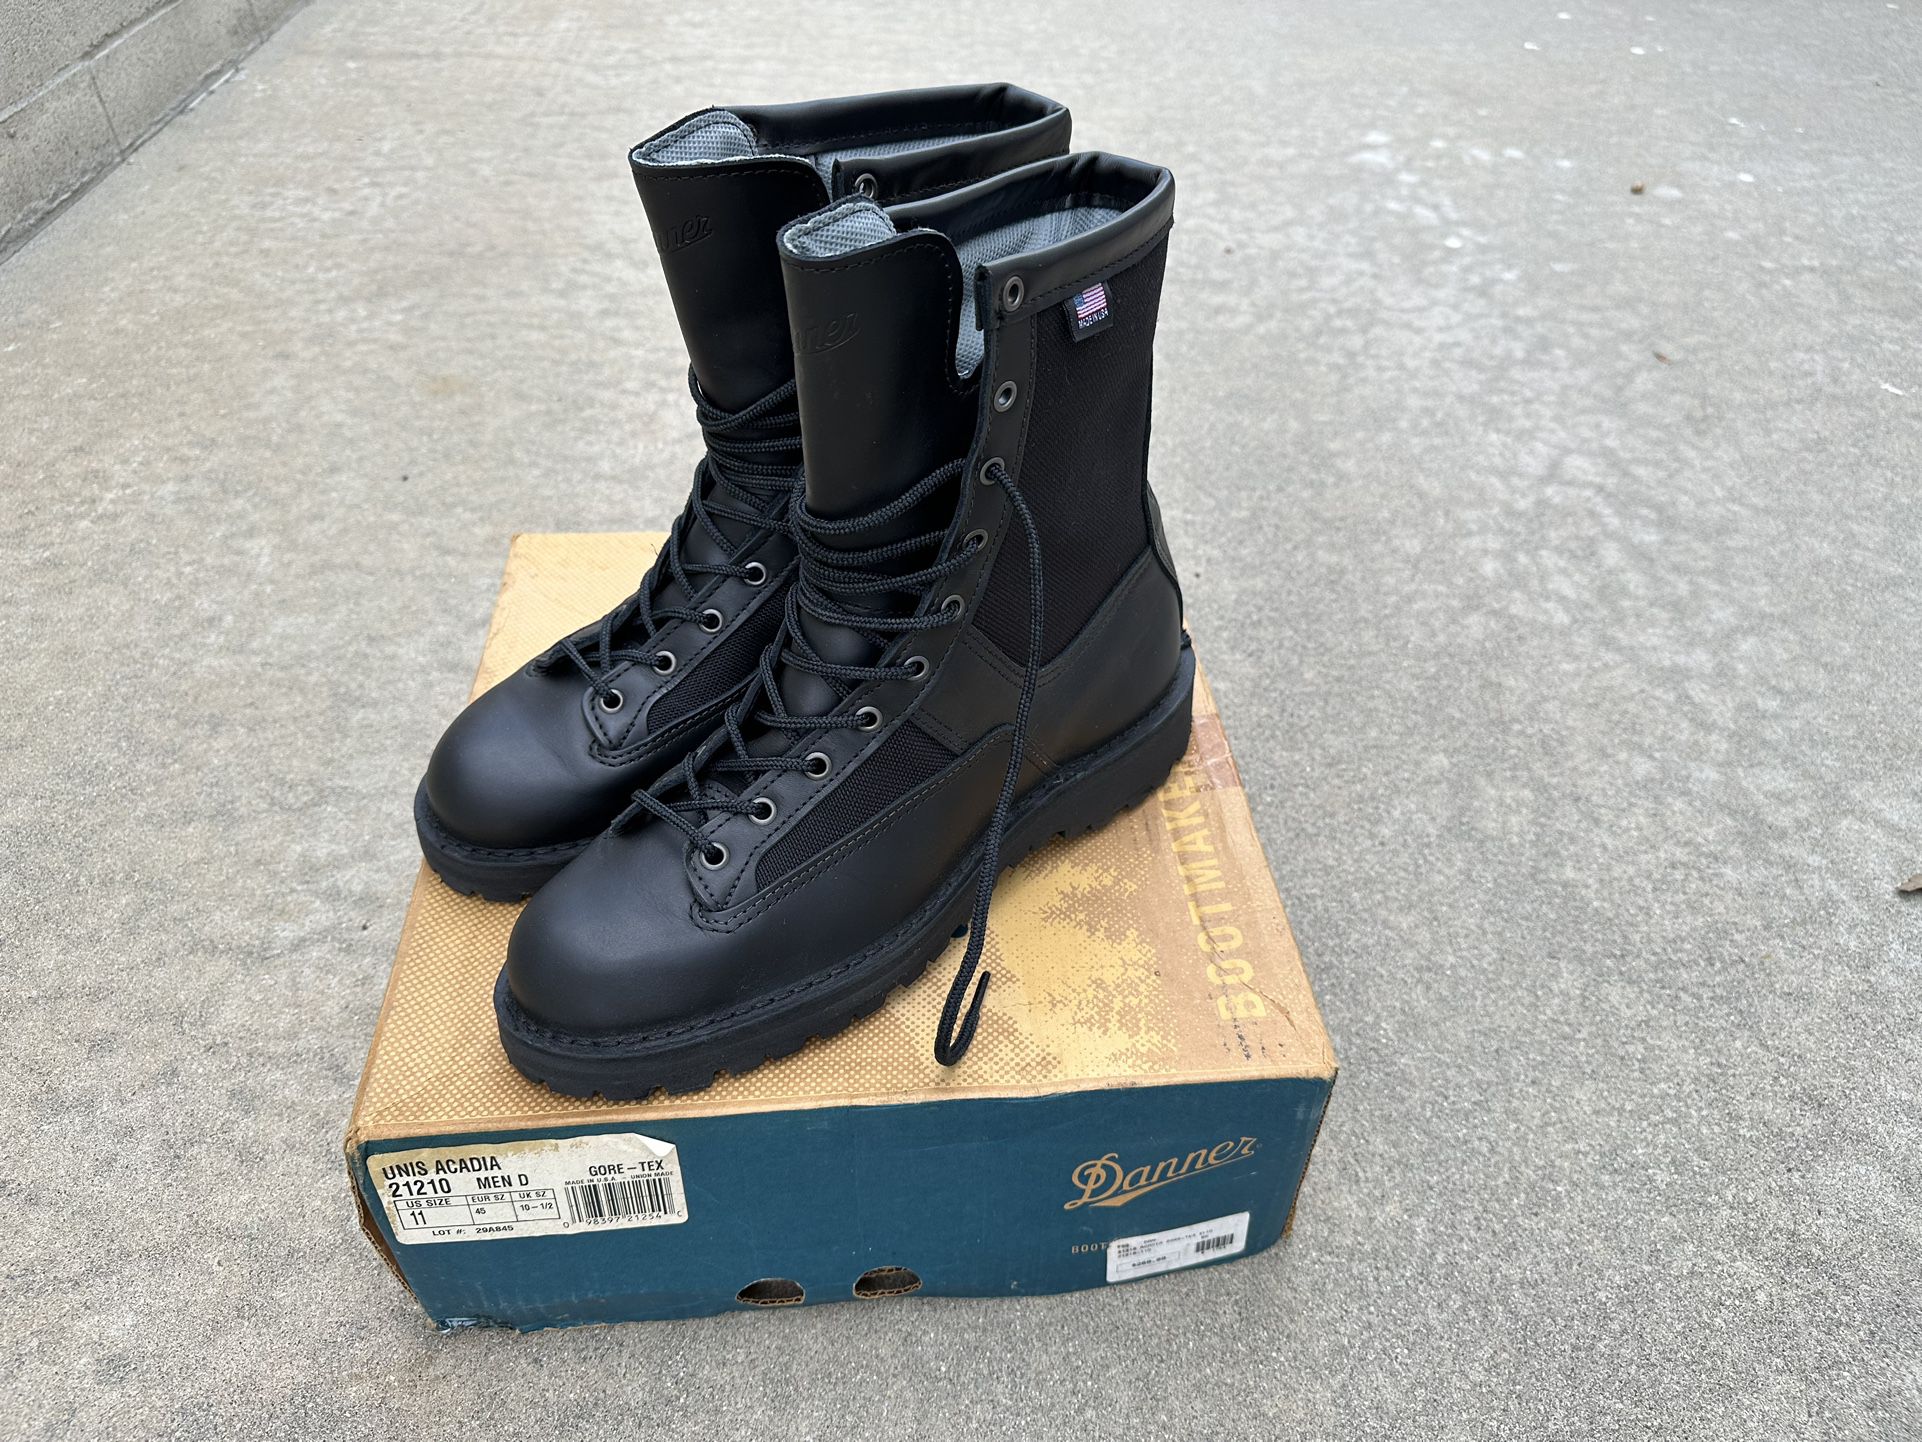 Danner Acadia 8” boot style# 21210 Size 11 D for Sale in Los